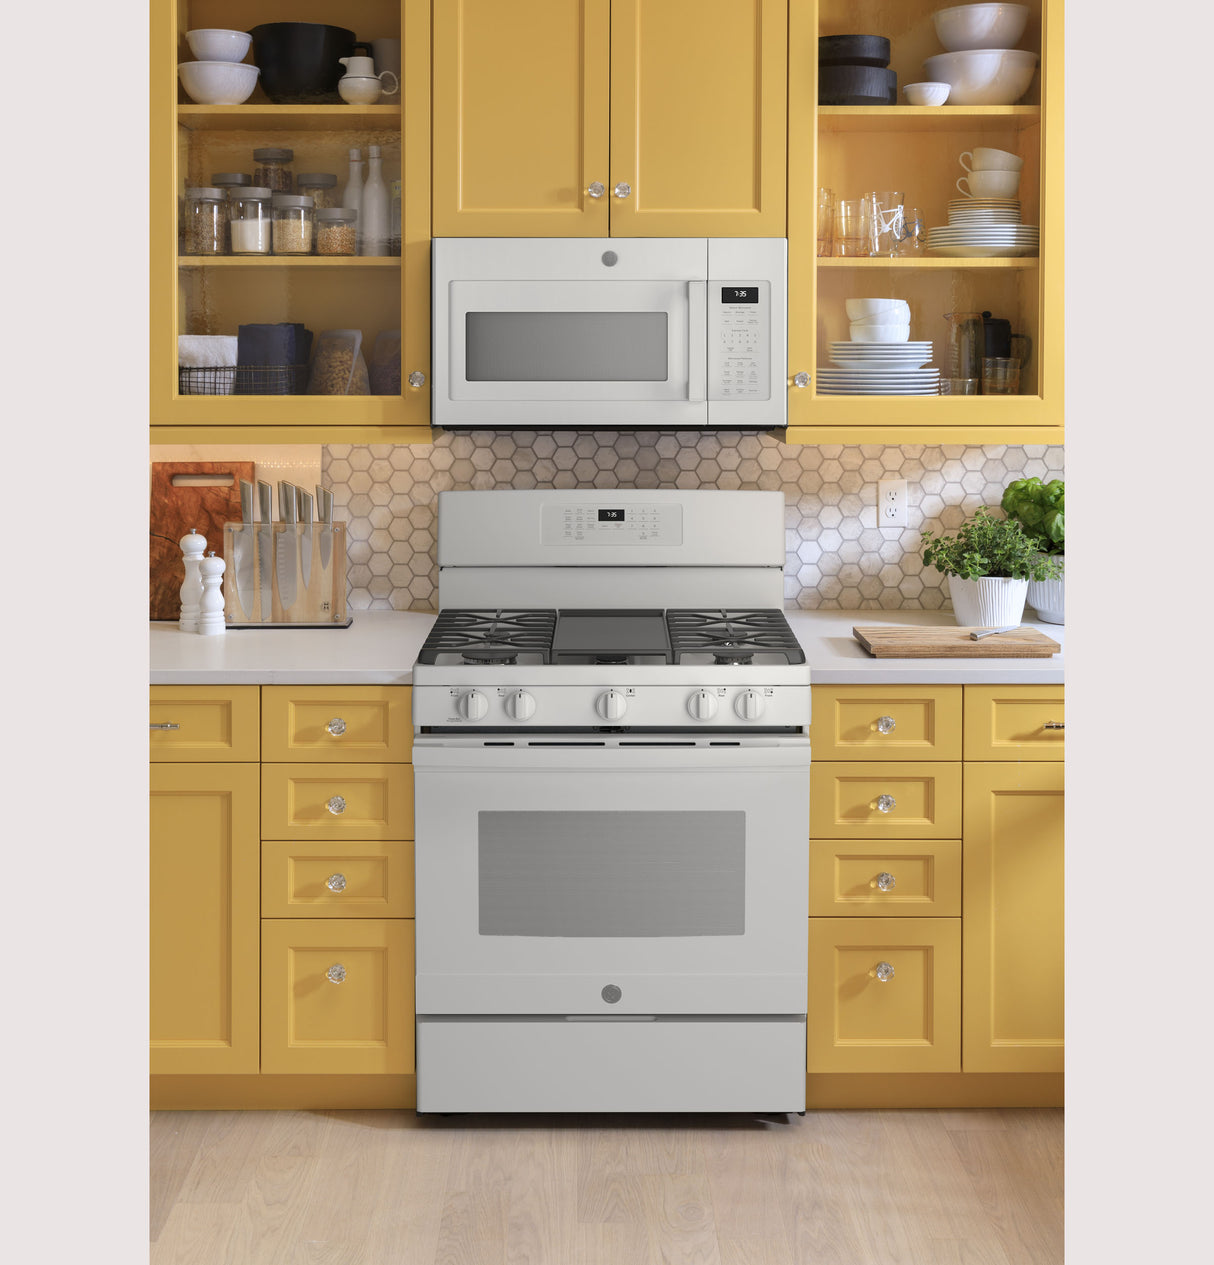 GE(R) 30" Free-Standing Gas Convection Range with No Preheat Air Fry - (JGB735DPWW)